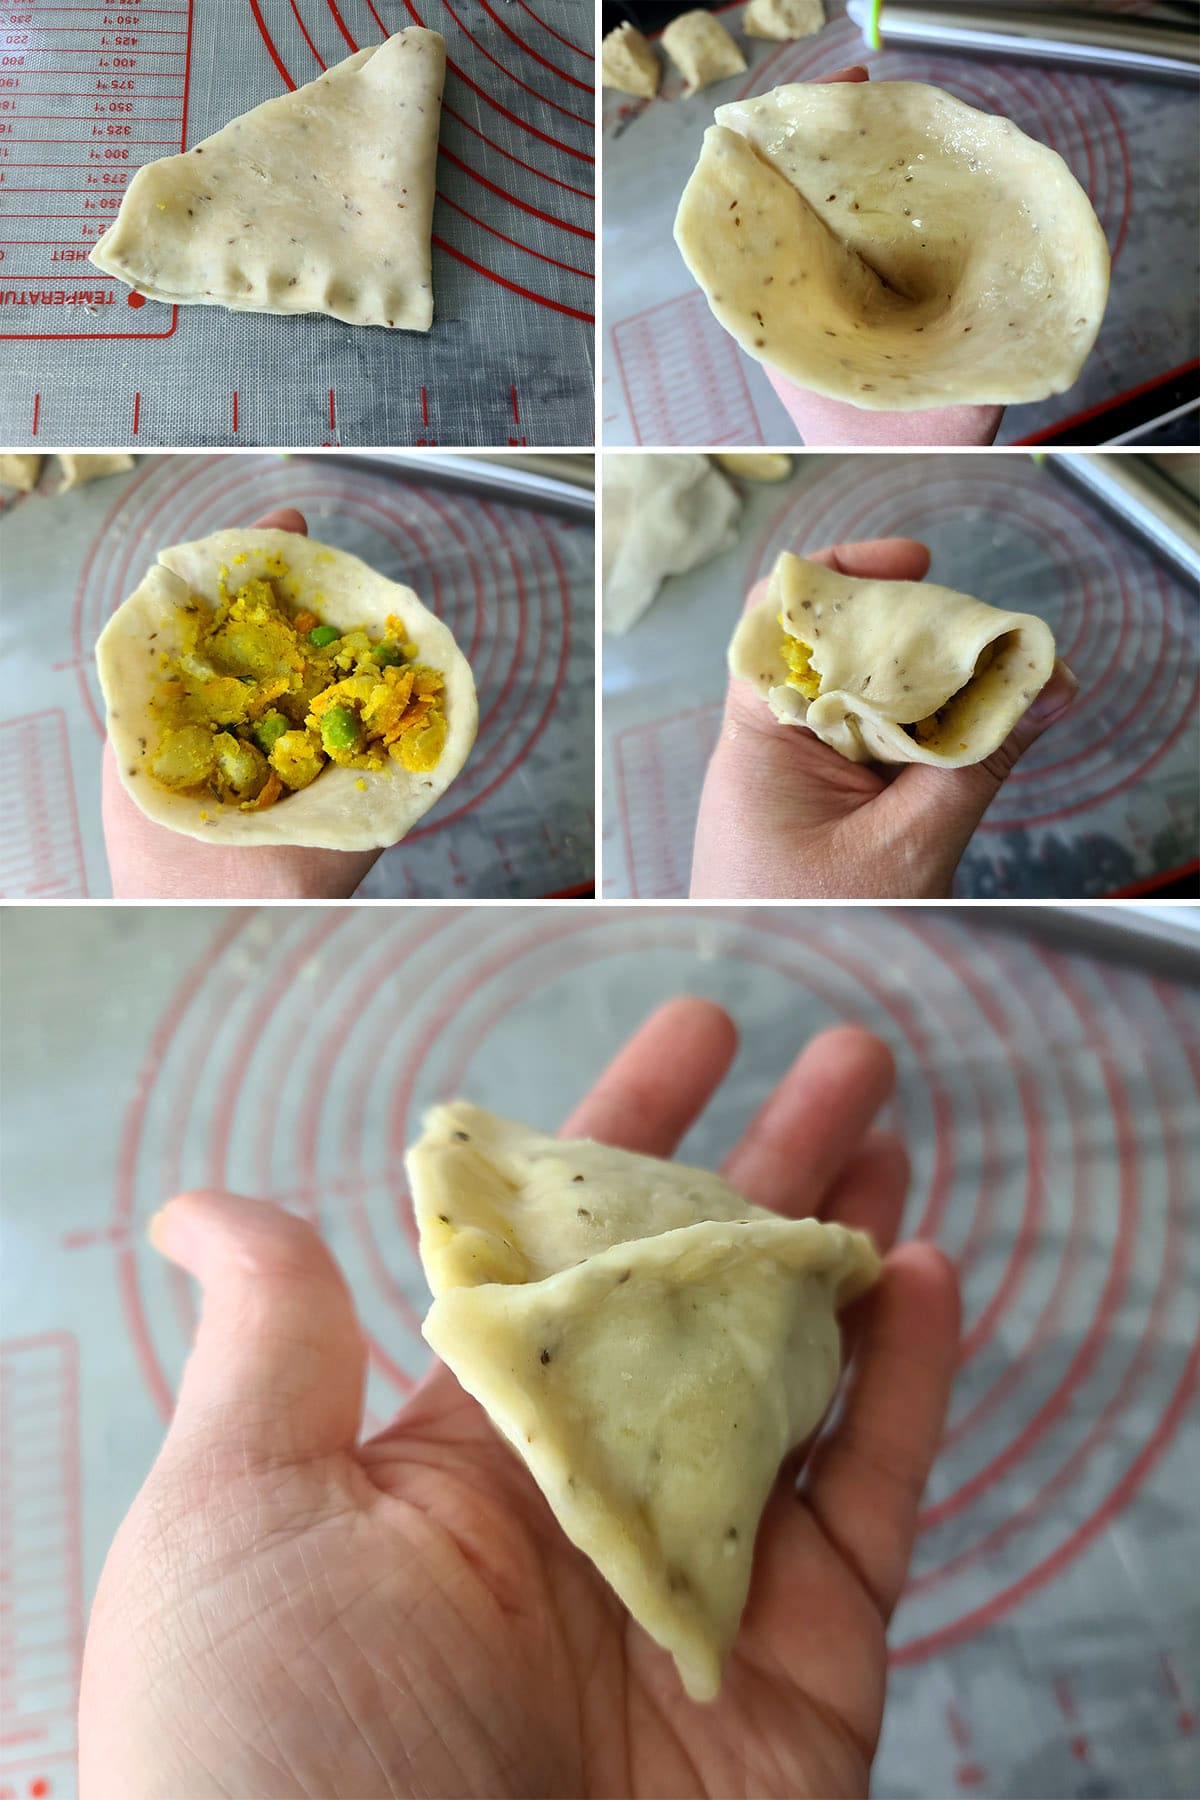 A 5 part image showing the piece of dough being formed into a cone, stuffed with potato filling, and sealed up into a pyramid shaped pastry.